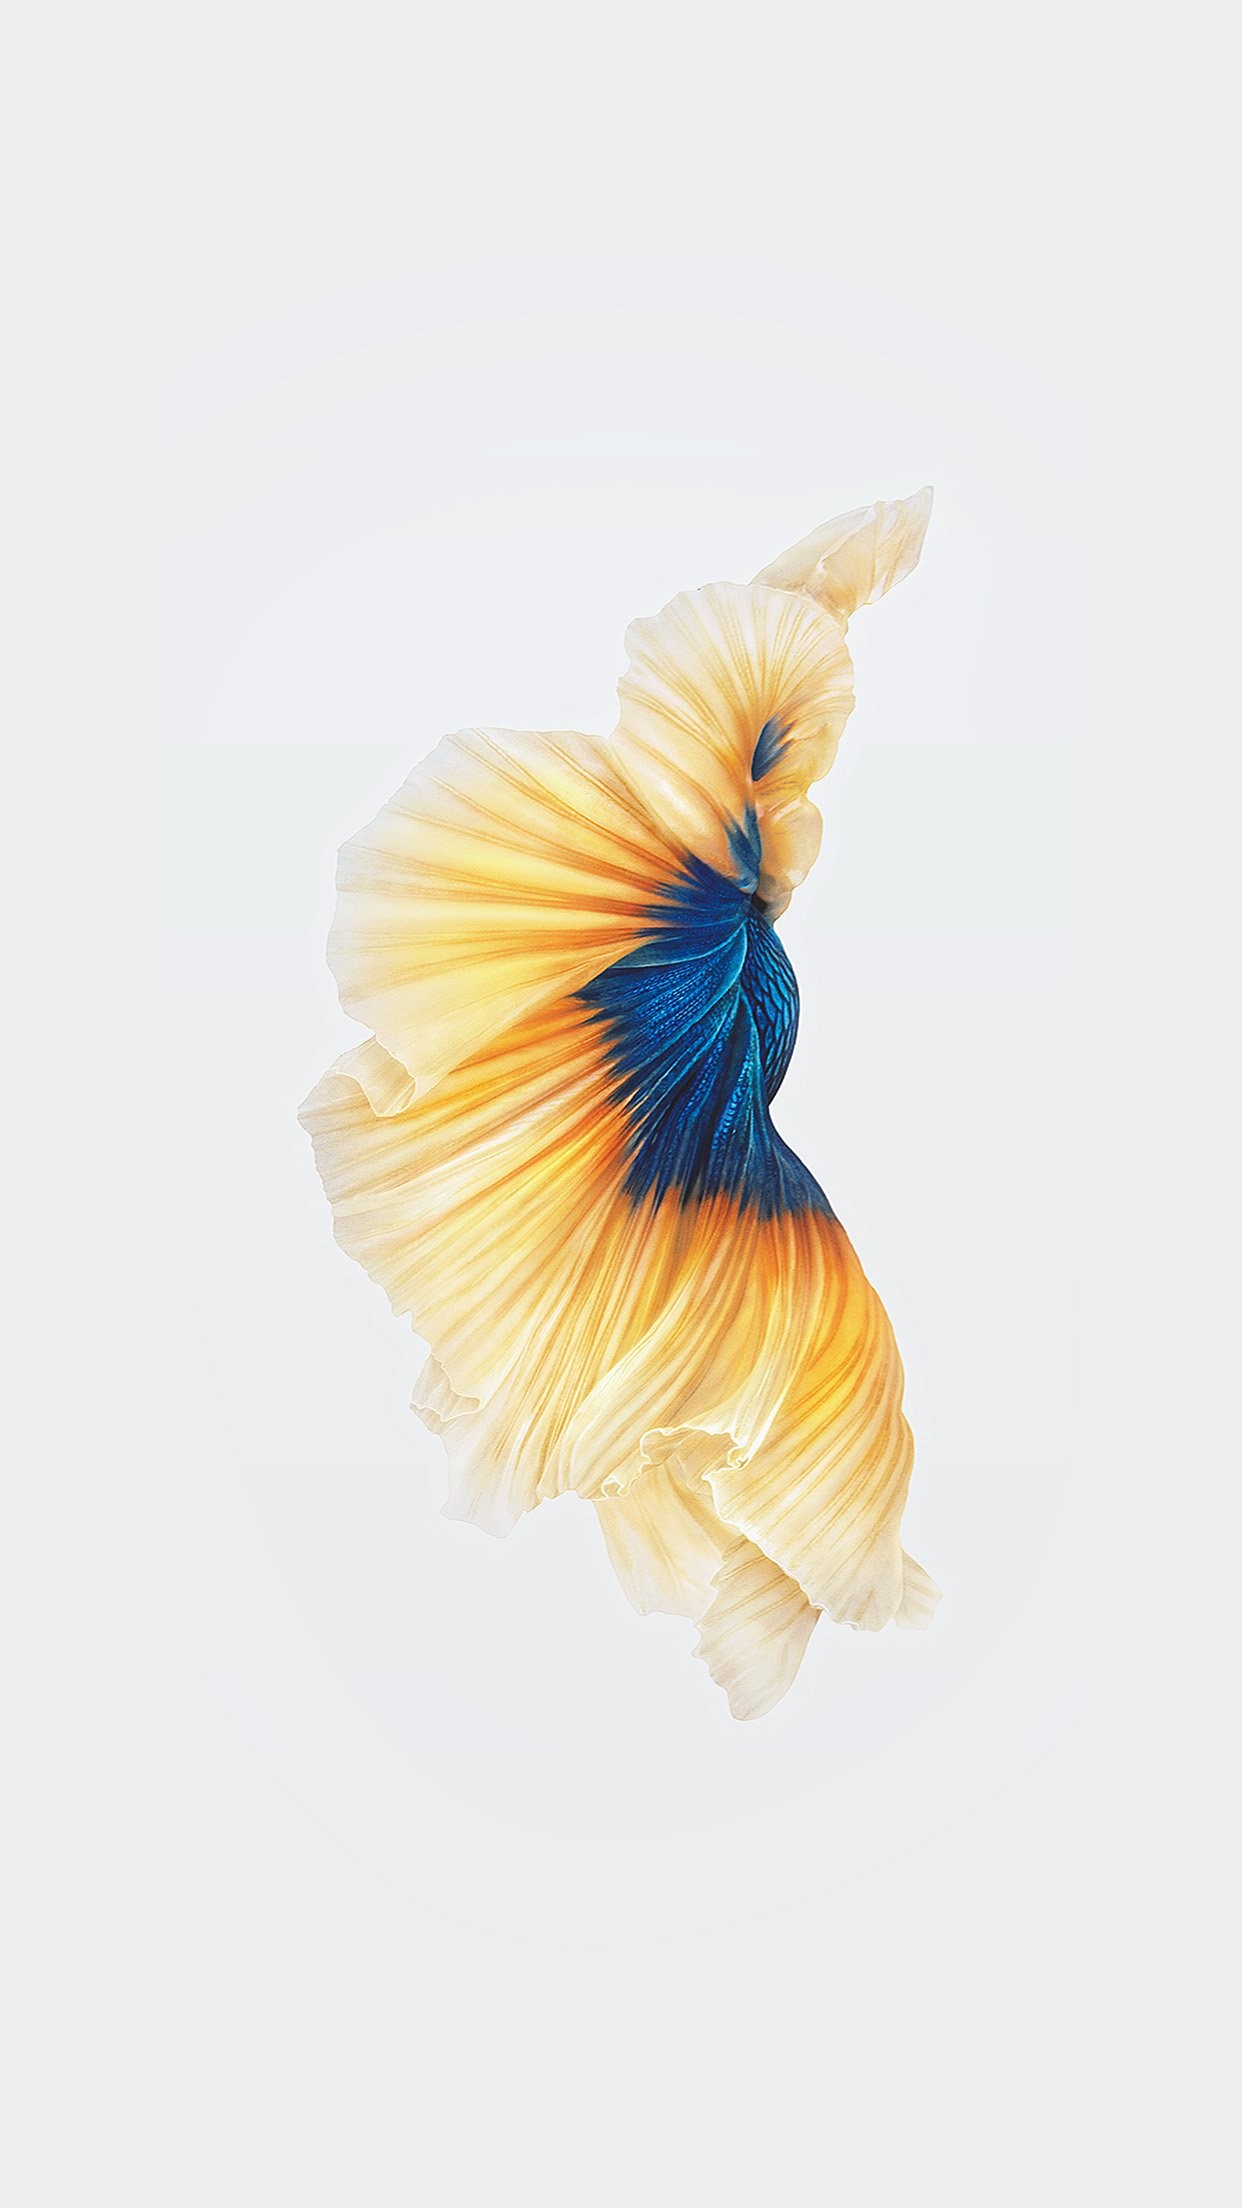 Live Wallpapers for iOS 9 (69+ images)